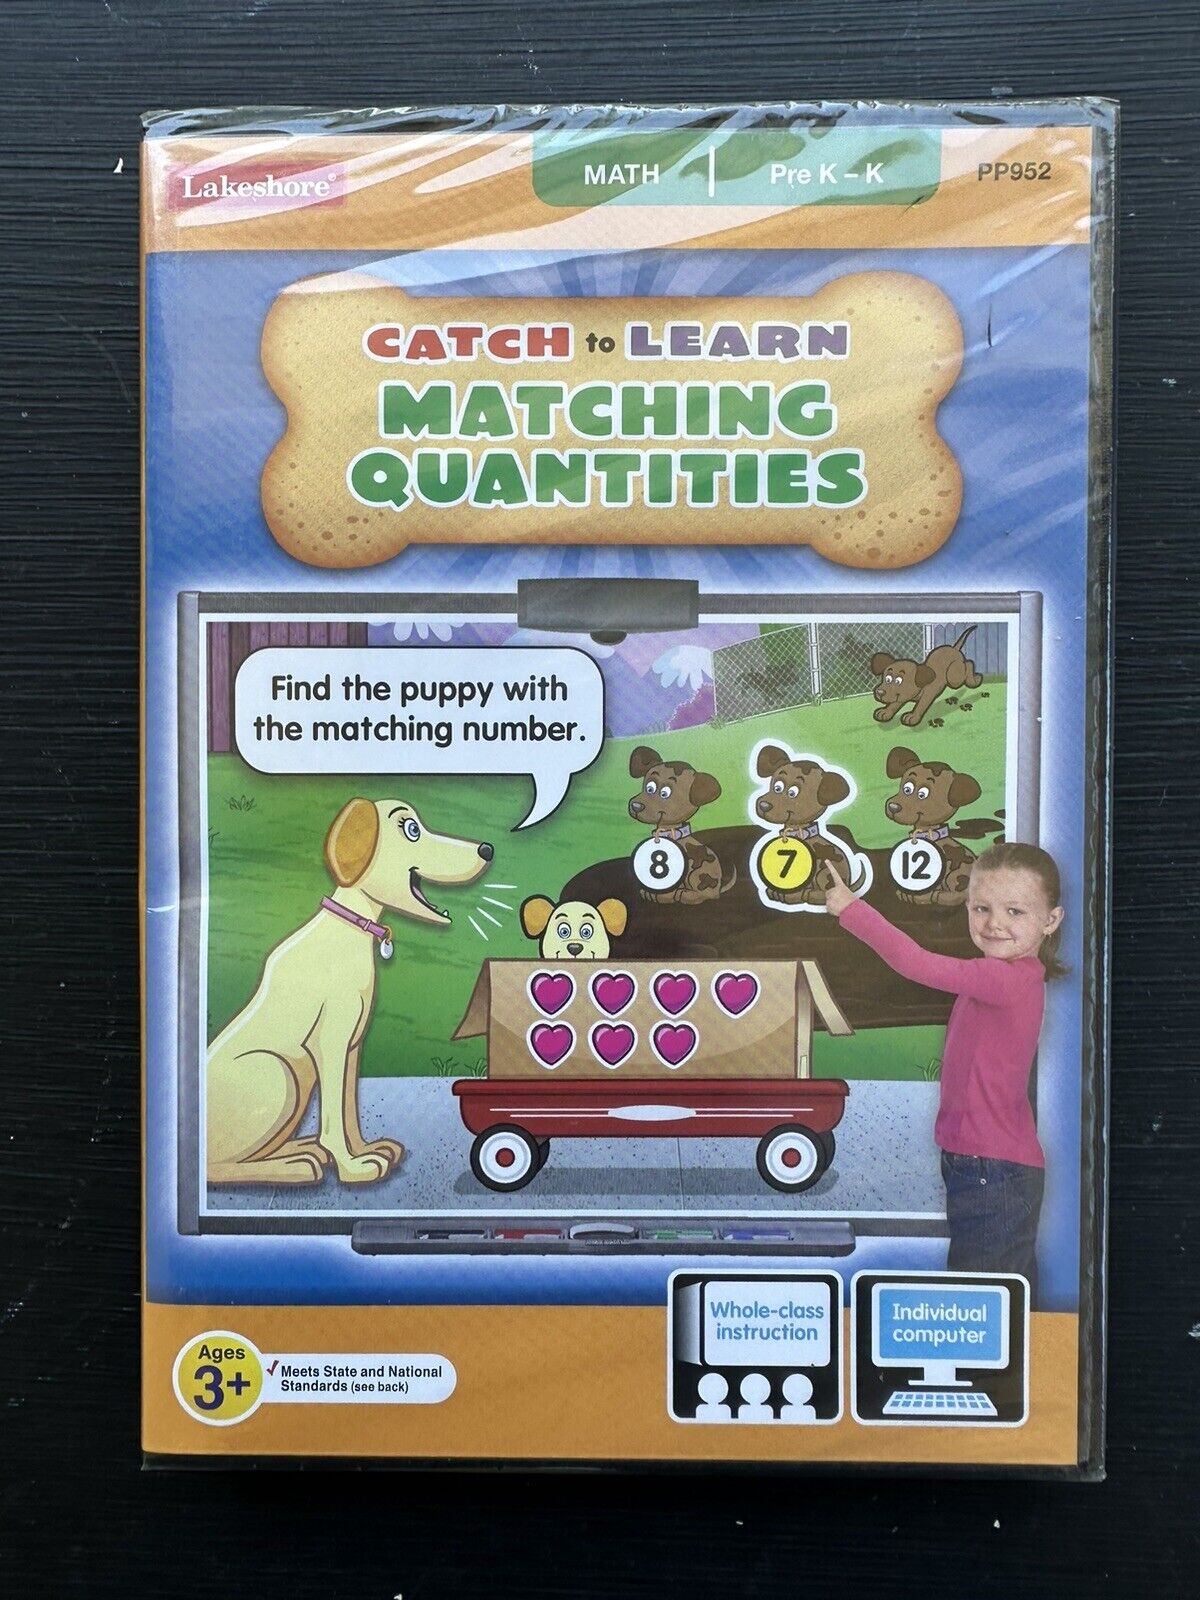 Lakeshore Catch to Learn Matching Quantities PC Software New Unopened